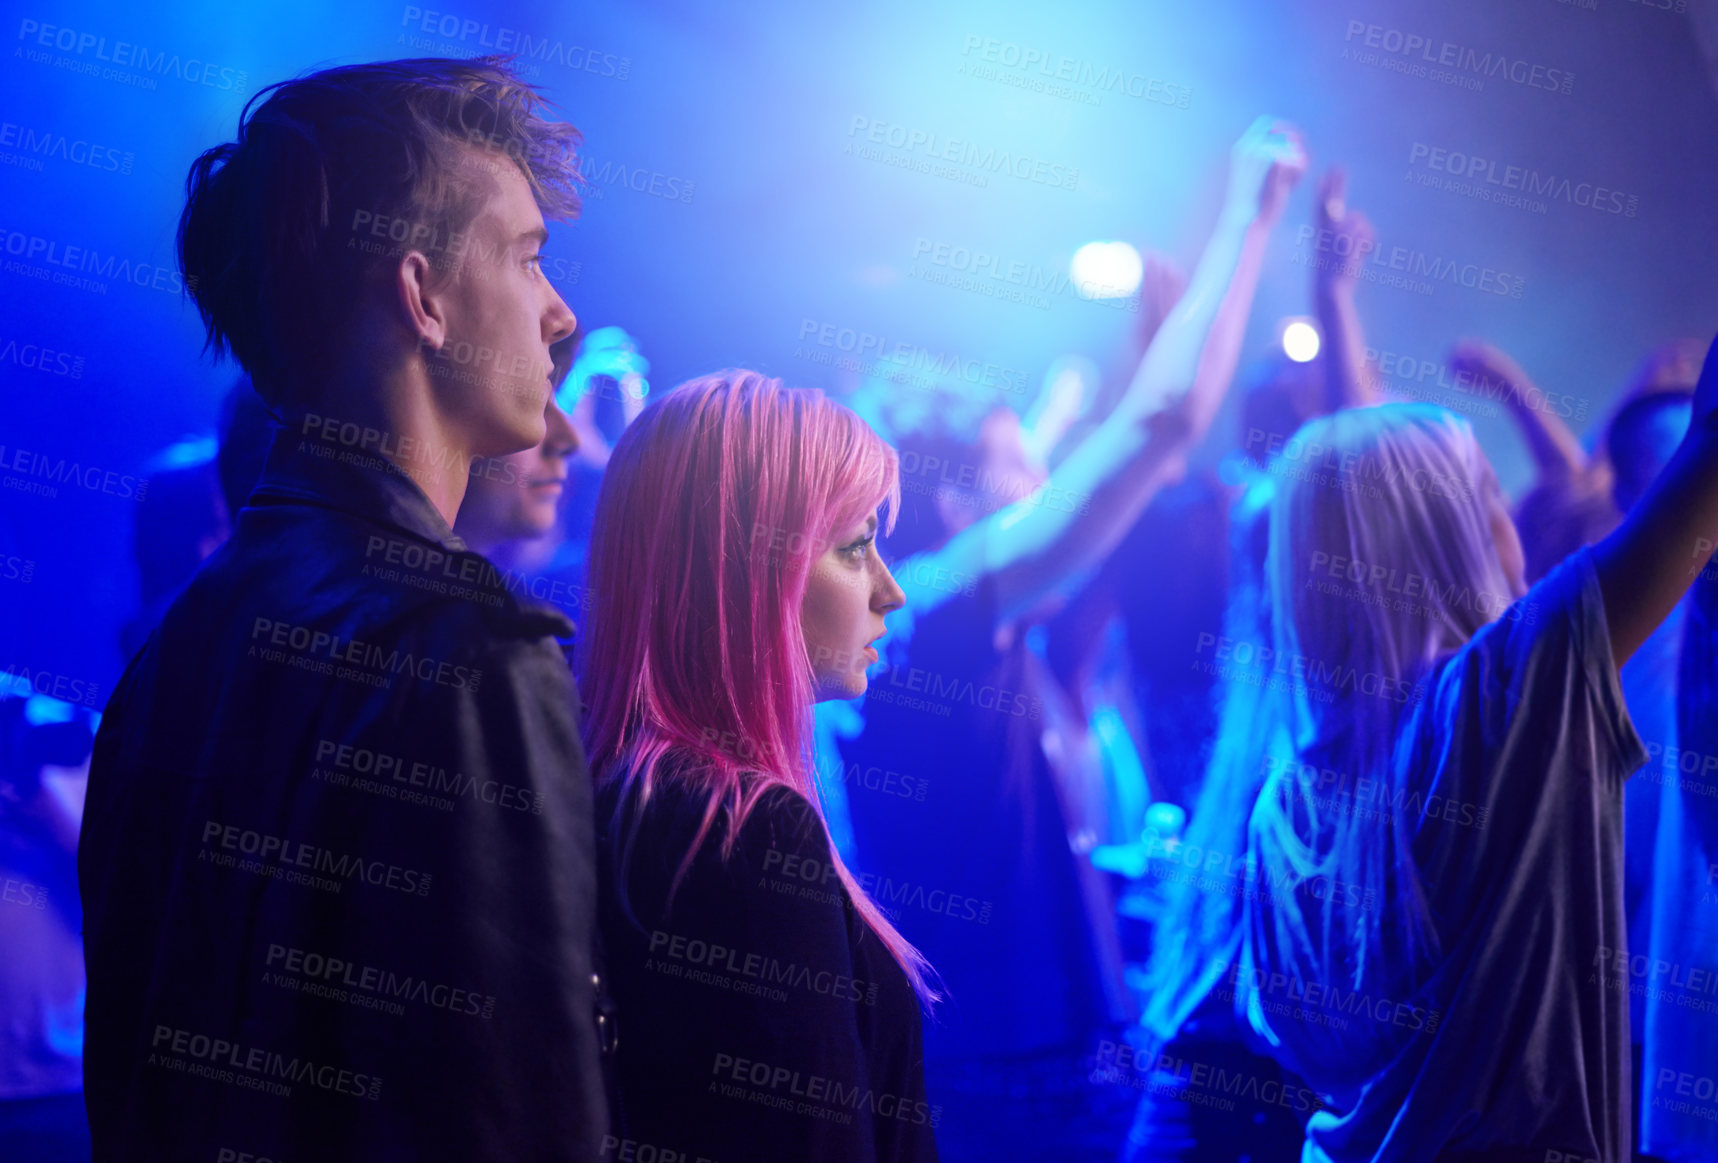 Buy stock photo Couple in crowd, man and woman at music festival, neon lights and watching live band performance on stage. Dance, group of people at party and blue lighting, fans on date at rock concert together.